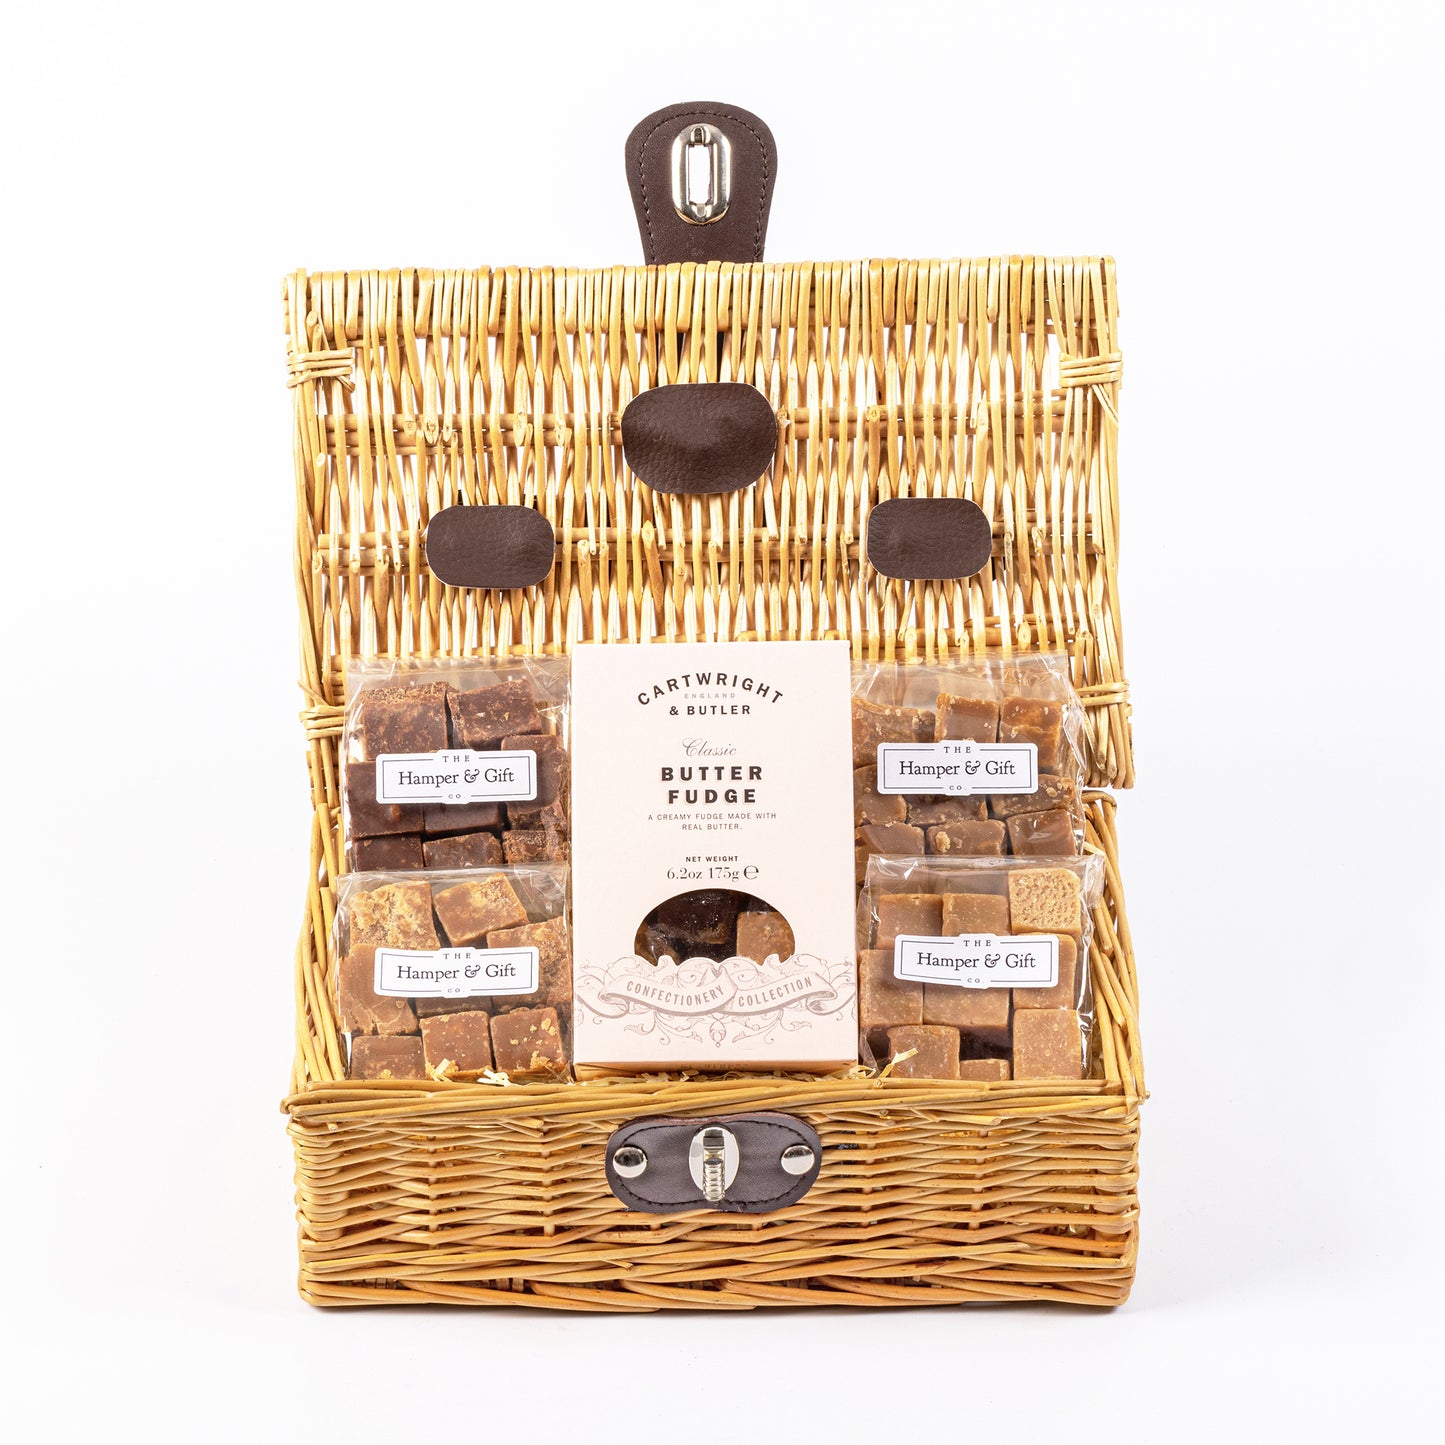 Little Fudge Hamper filled with a variety of gourmet fudge